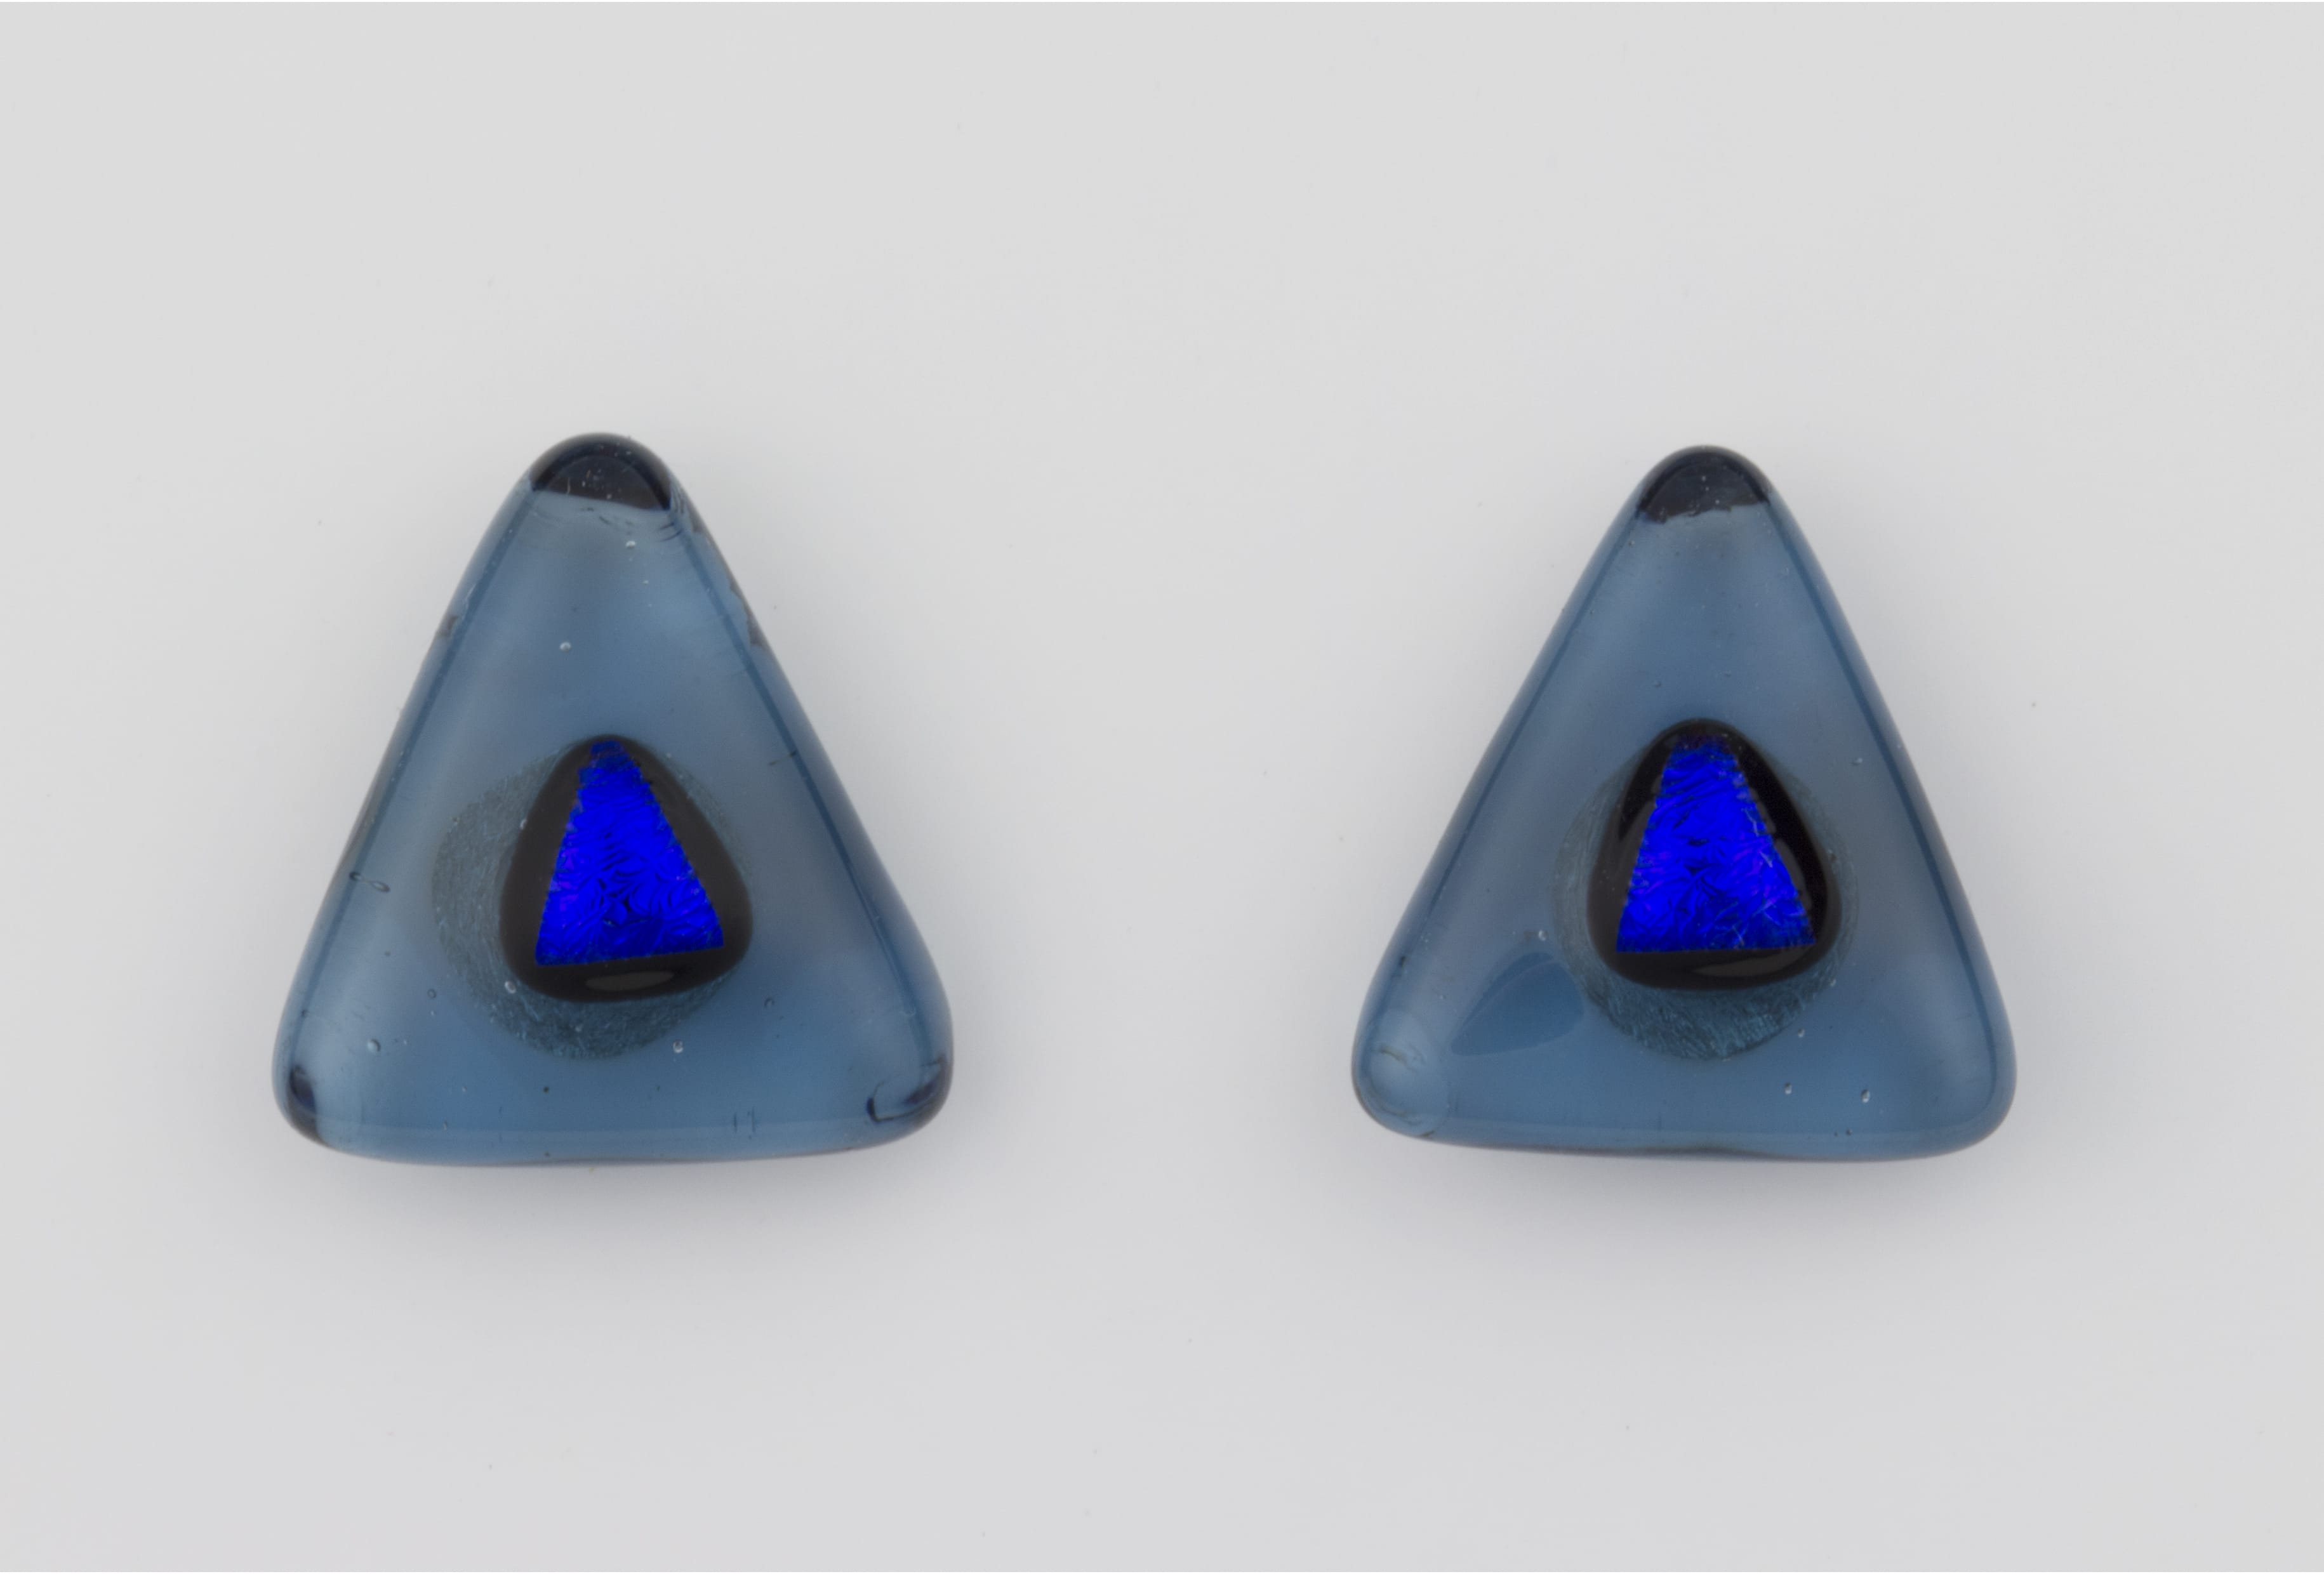 Dichroic glass jewellery uk, handmade sea blue triangle stud earrings blue dichroic spot, glass 14/15mm sides, sterling silver